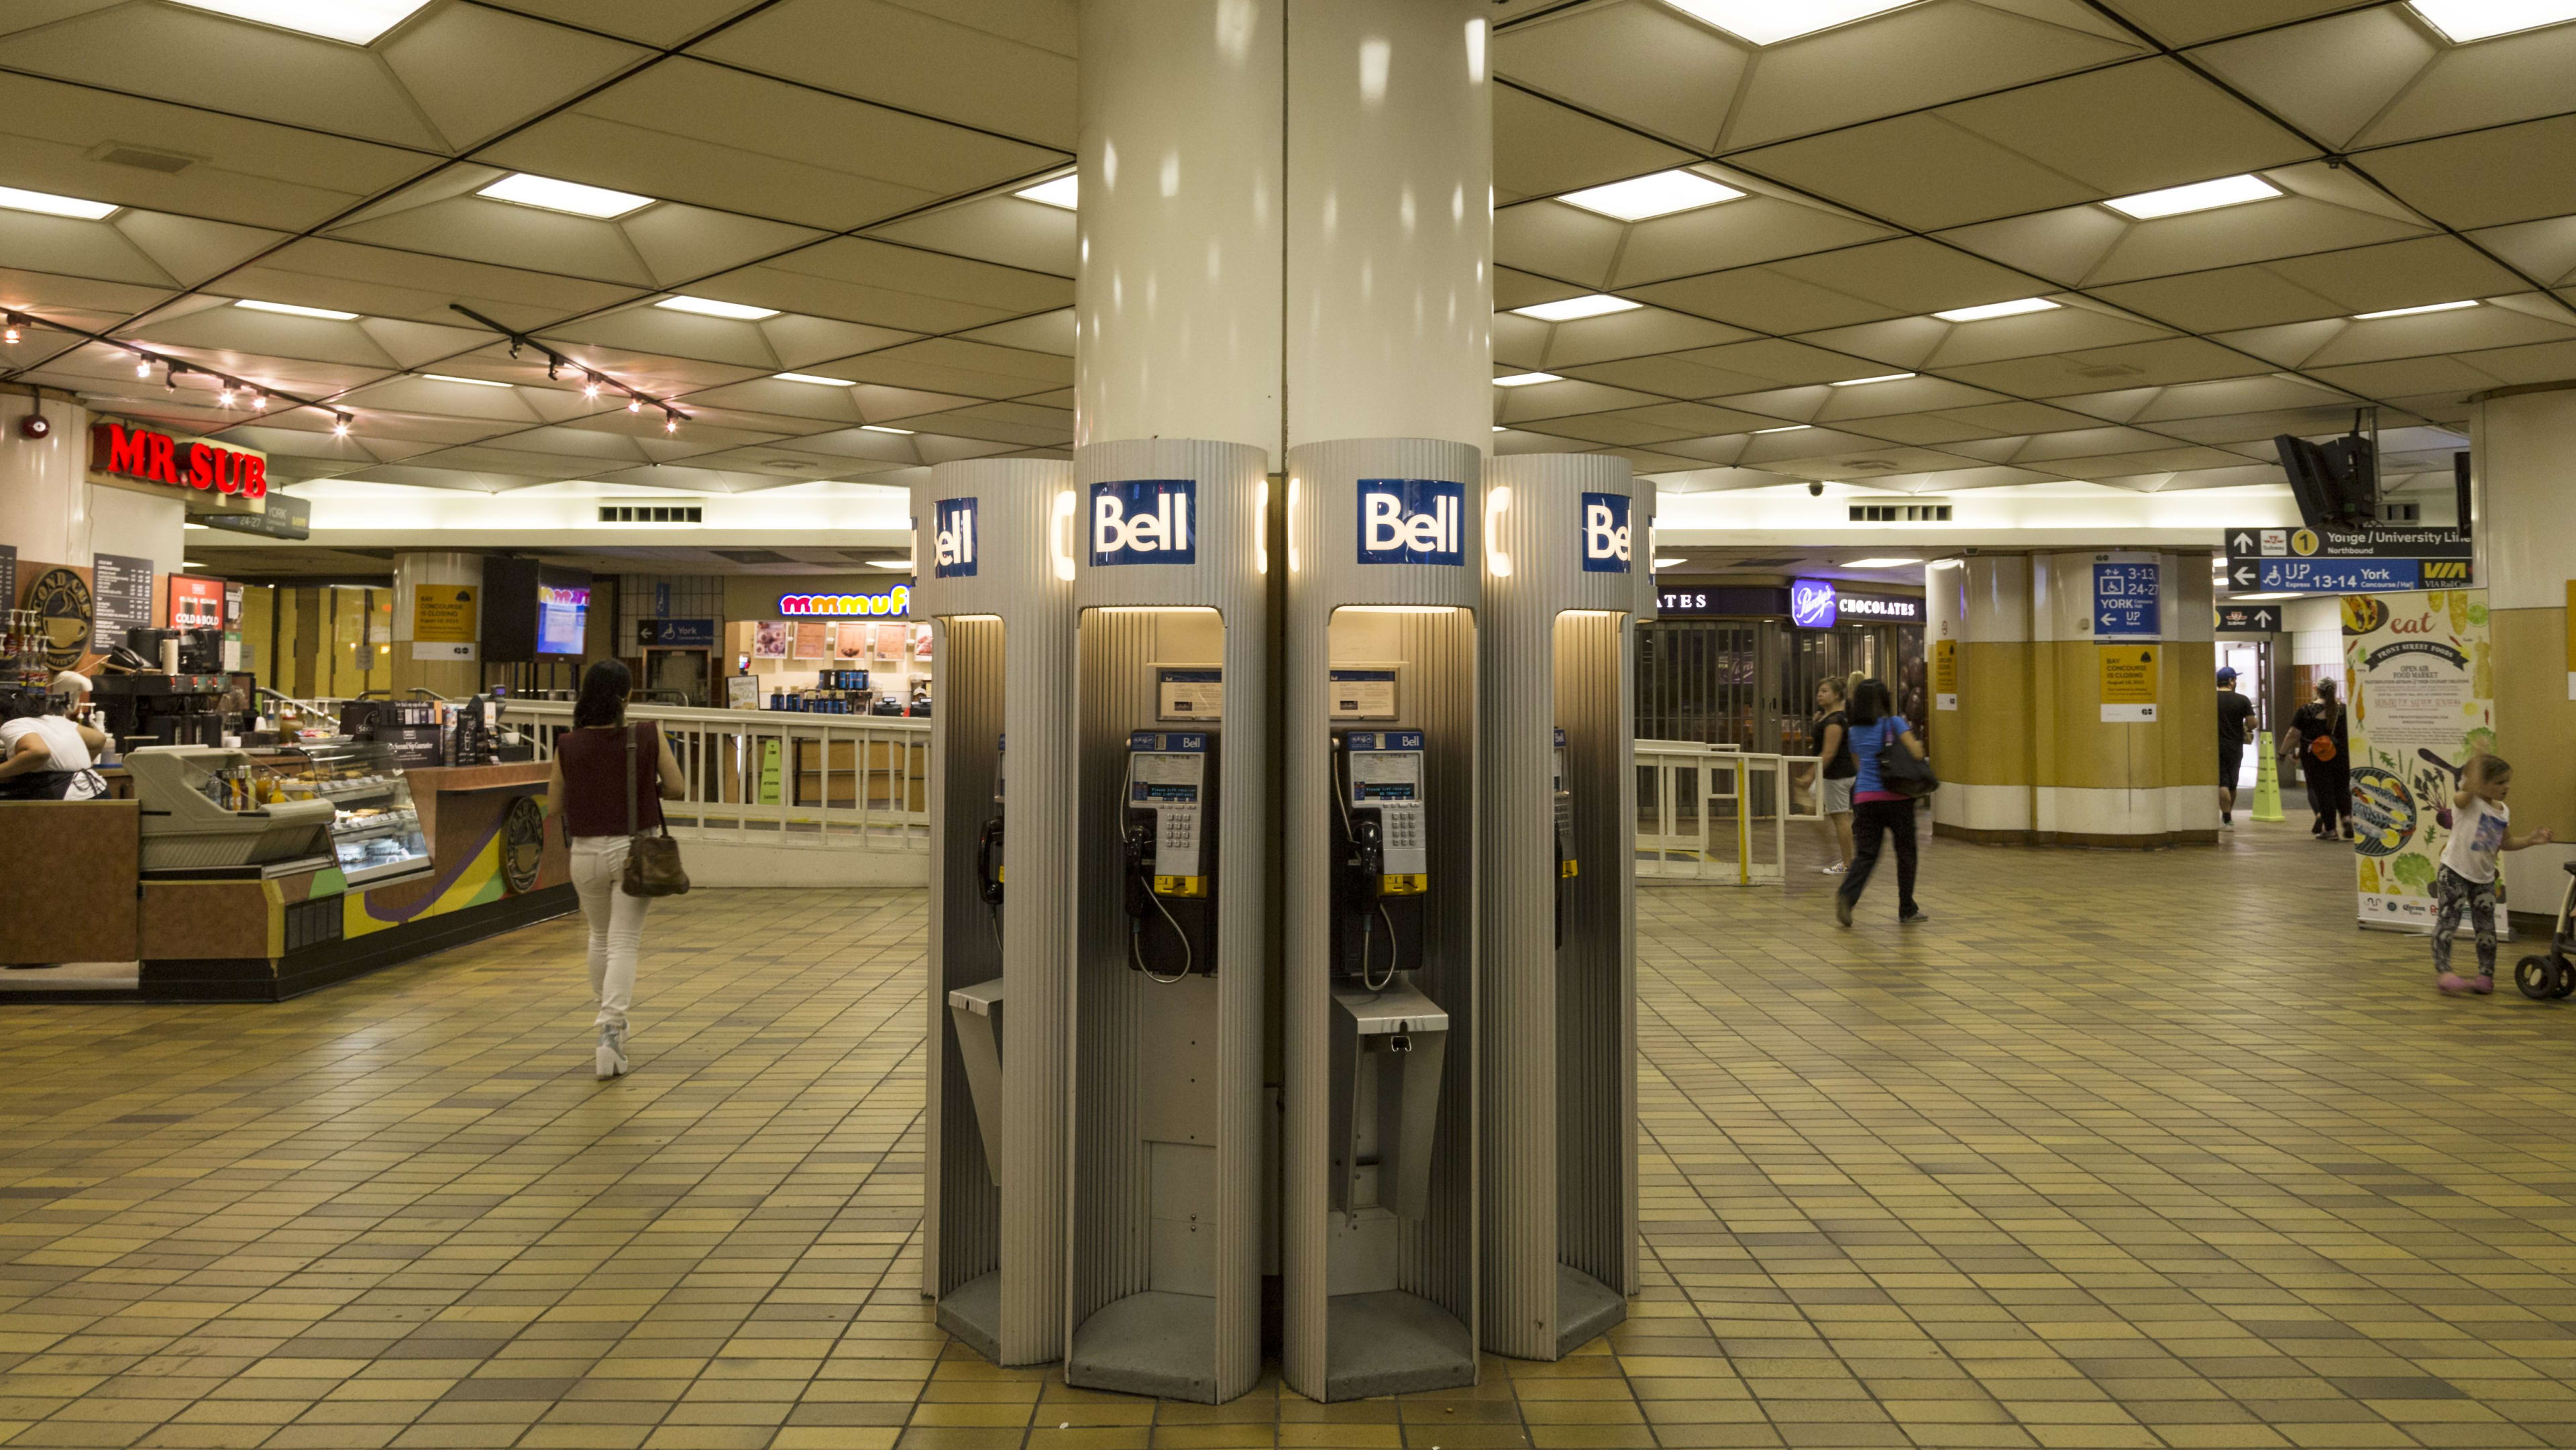 a closeup of the payphone bank in the old bay concourse